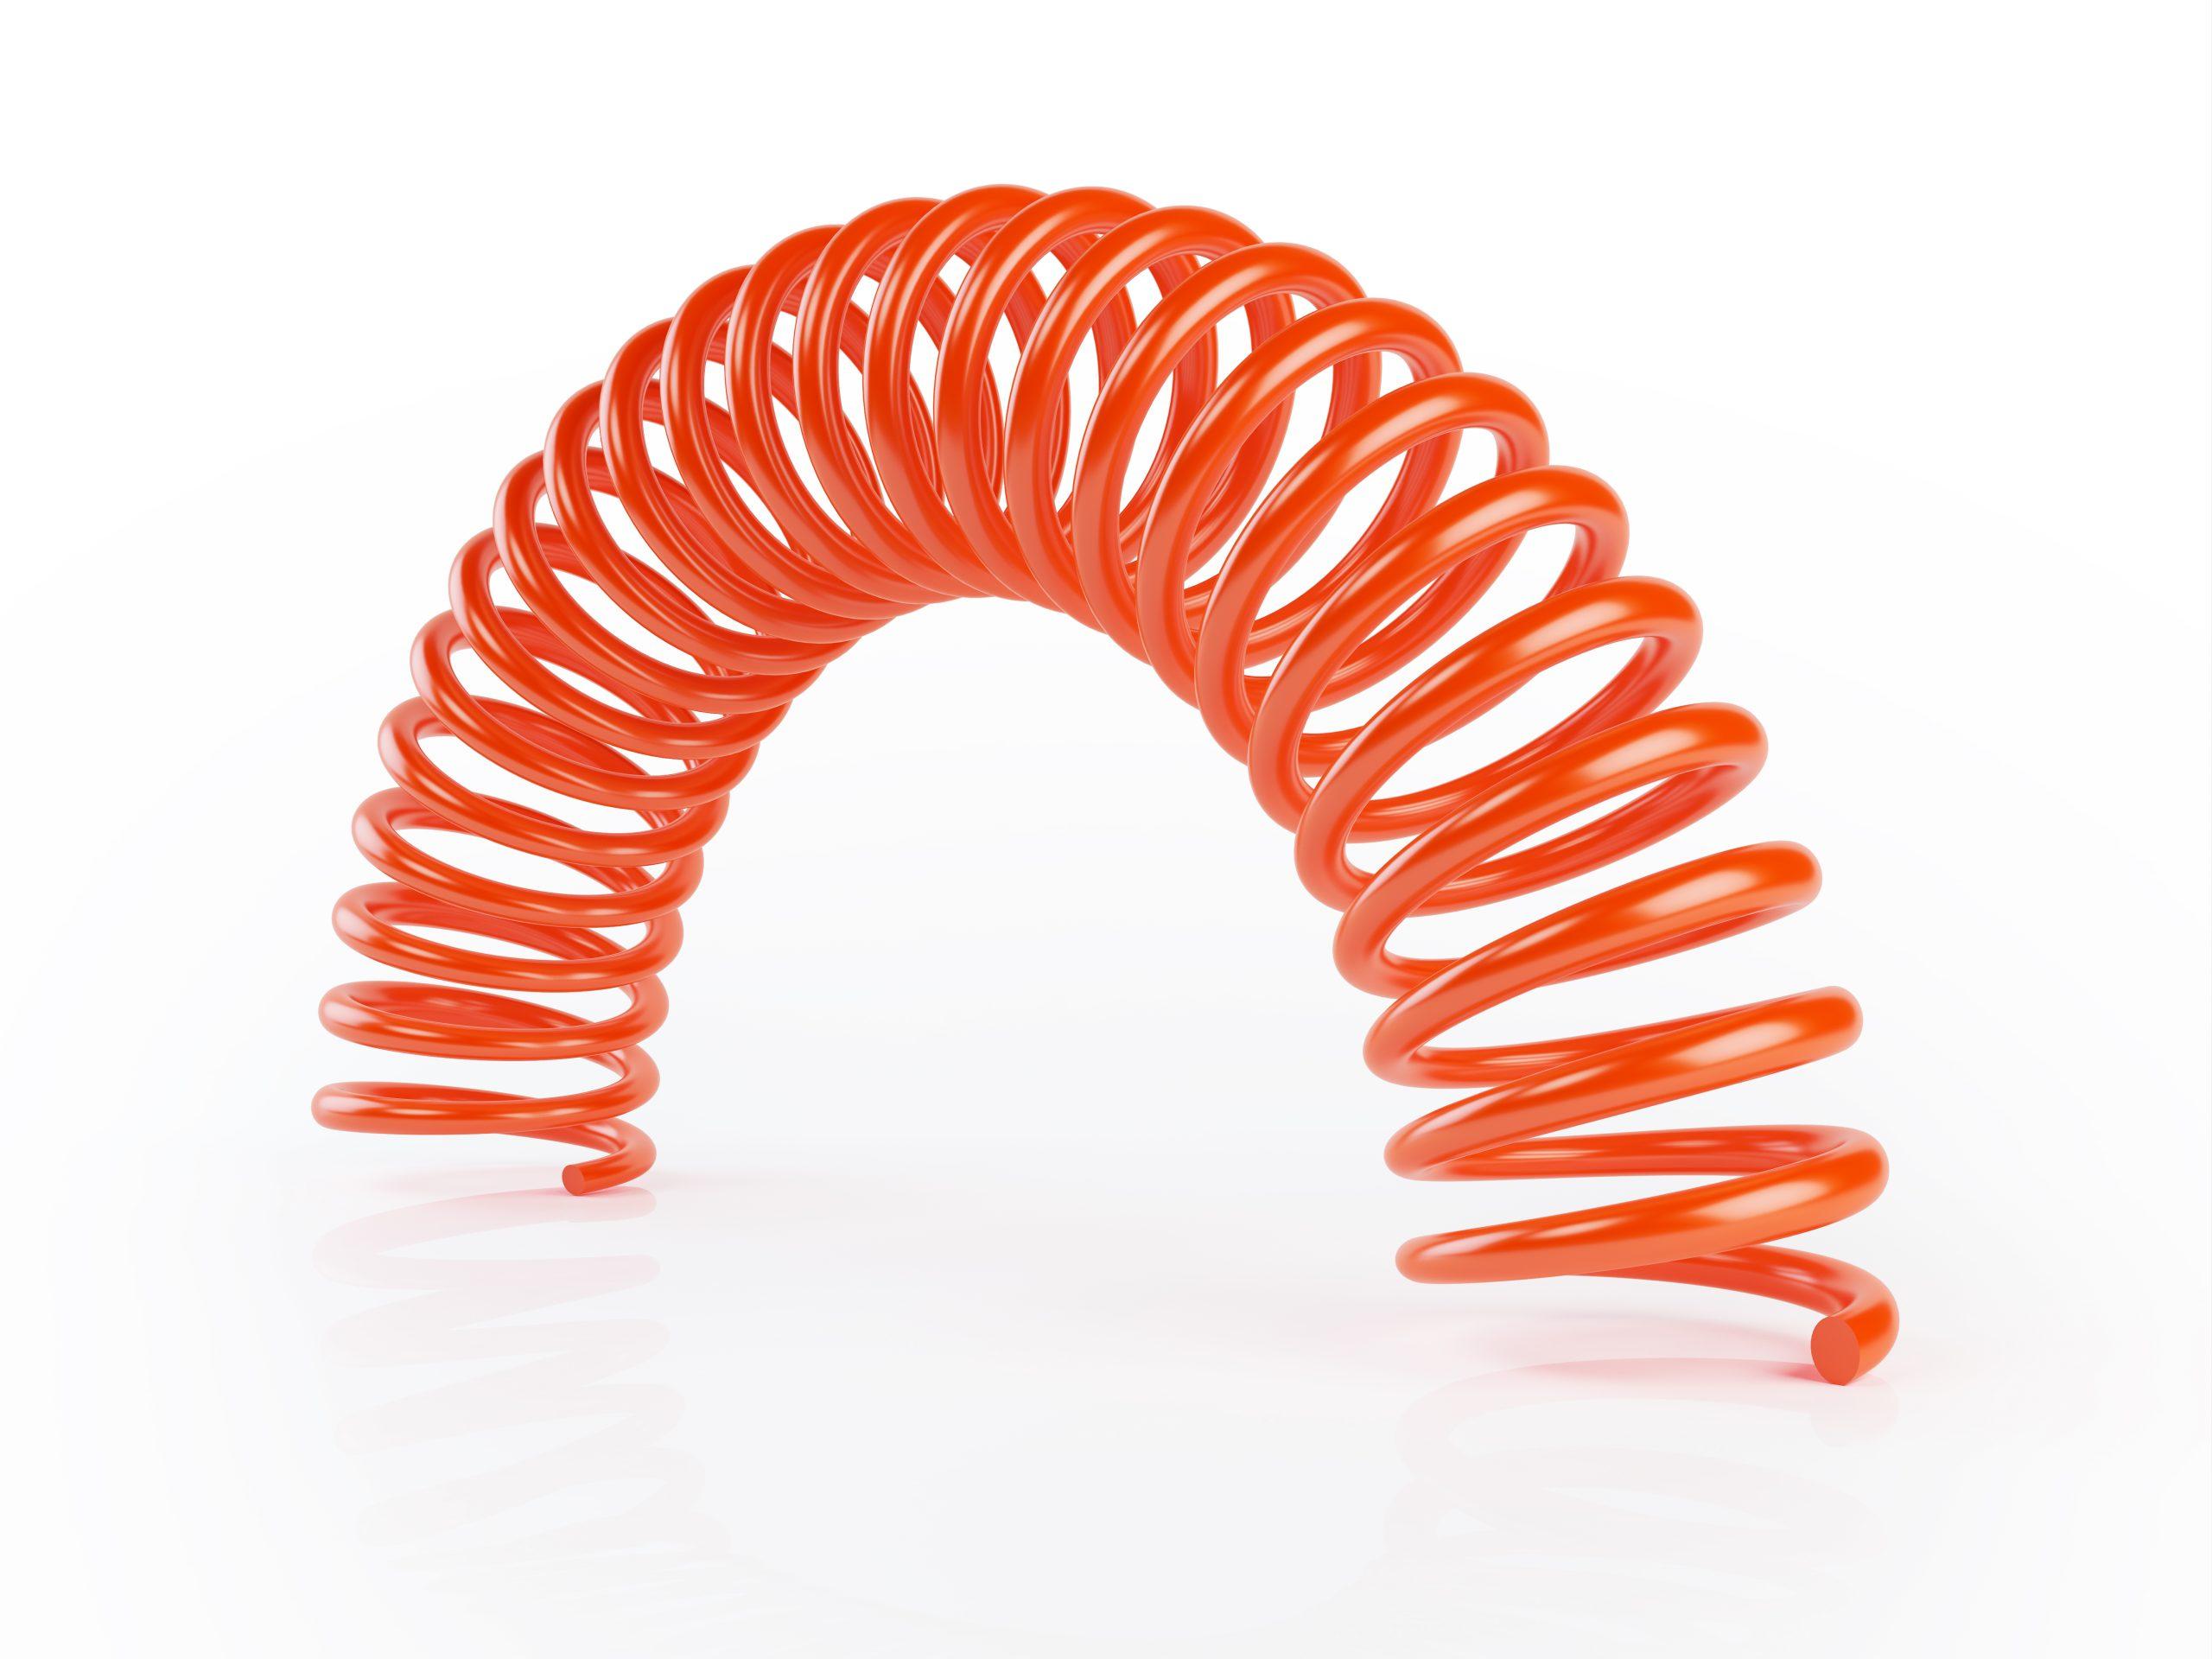 High quality render of bending orange metal spring. Isolated on white background. Clipping path is included.